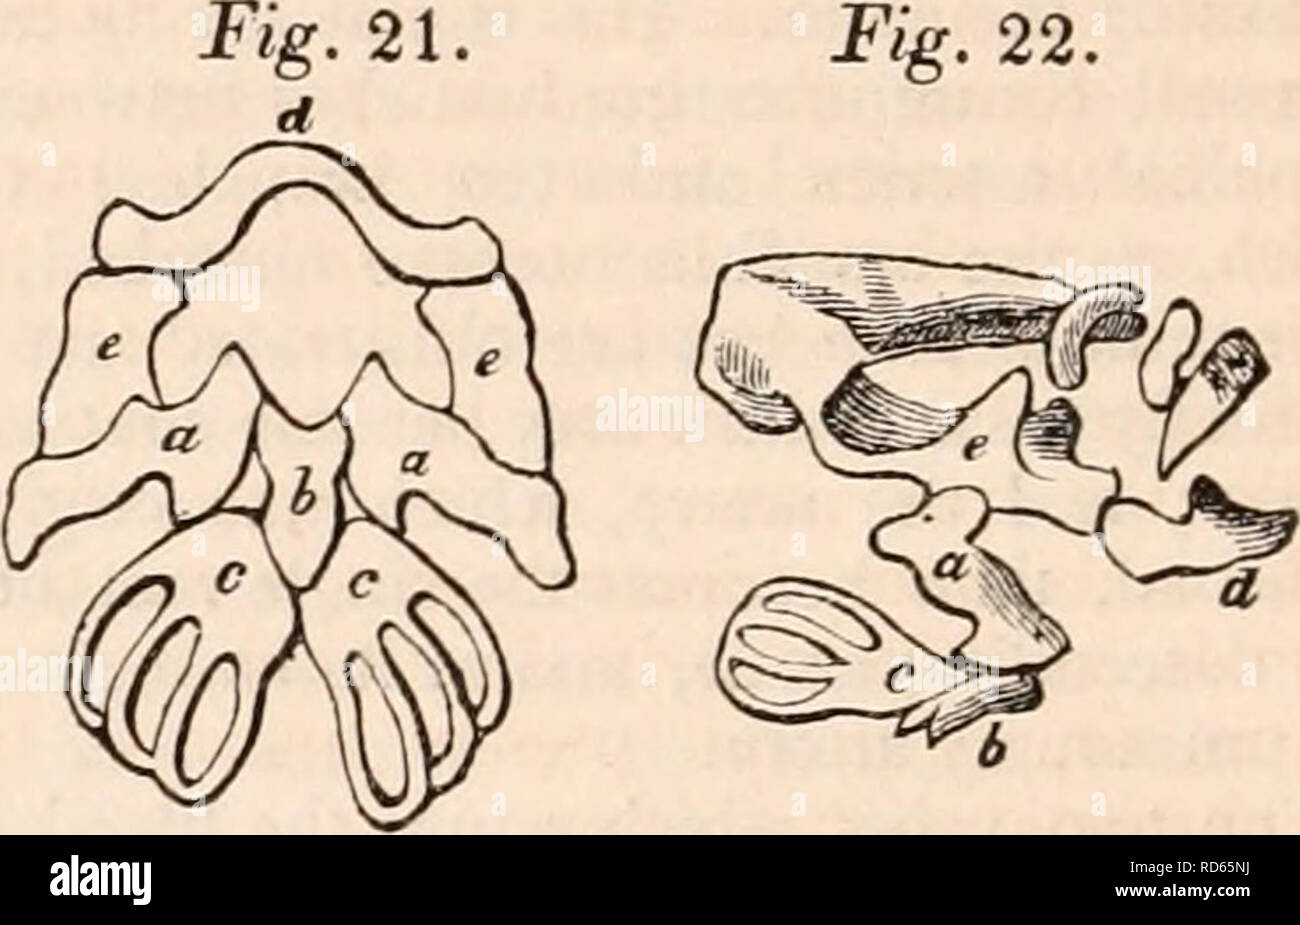 . The cyclopædia of anatomy and physiology. Anatomy; Physiology; Zoology. fore, the heart consists of a single ventricle, and of two auricles. The existence of a se- cond auricle was first demonstrated in the higher forms, the frogs and toads, by Dr. Davy,* and, although in the latest works of Cuvier and Meckel the auricle in these forms is de- scribed as single, yet the more complicated structure has since been amply confirmed by many other anatomists. Weberf especially has described the biauricular structure in a large American frog; but he failed to demon- strate it in the perennibranchiate Stock Photo